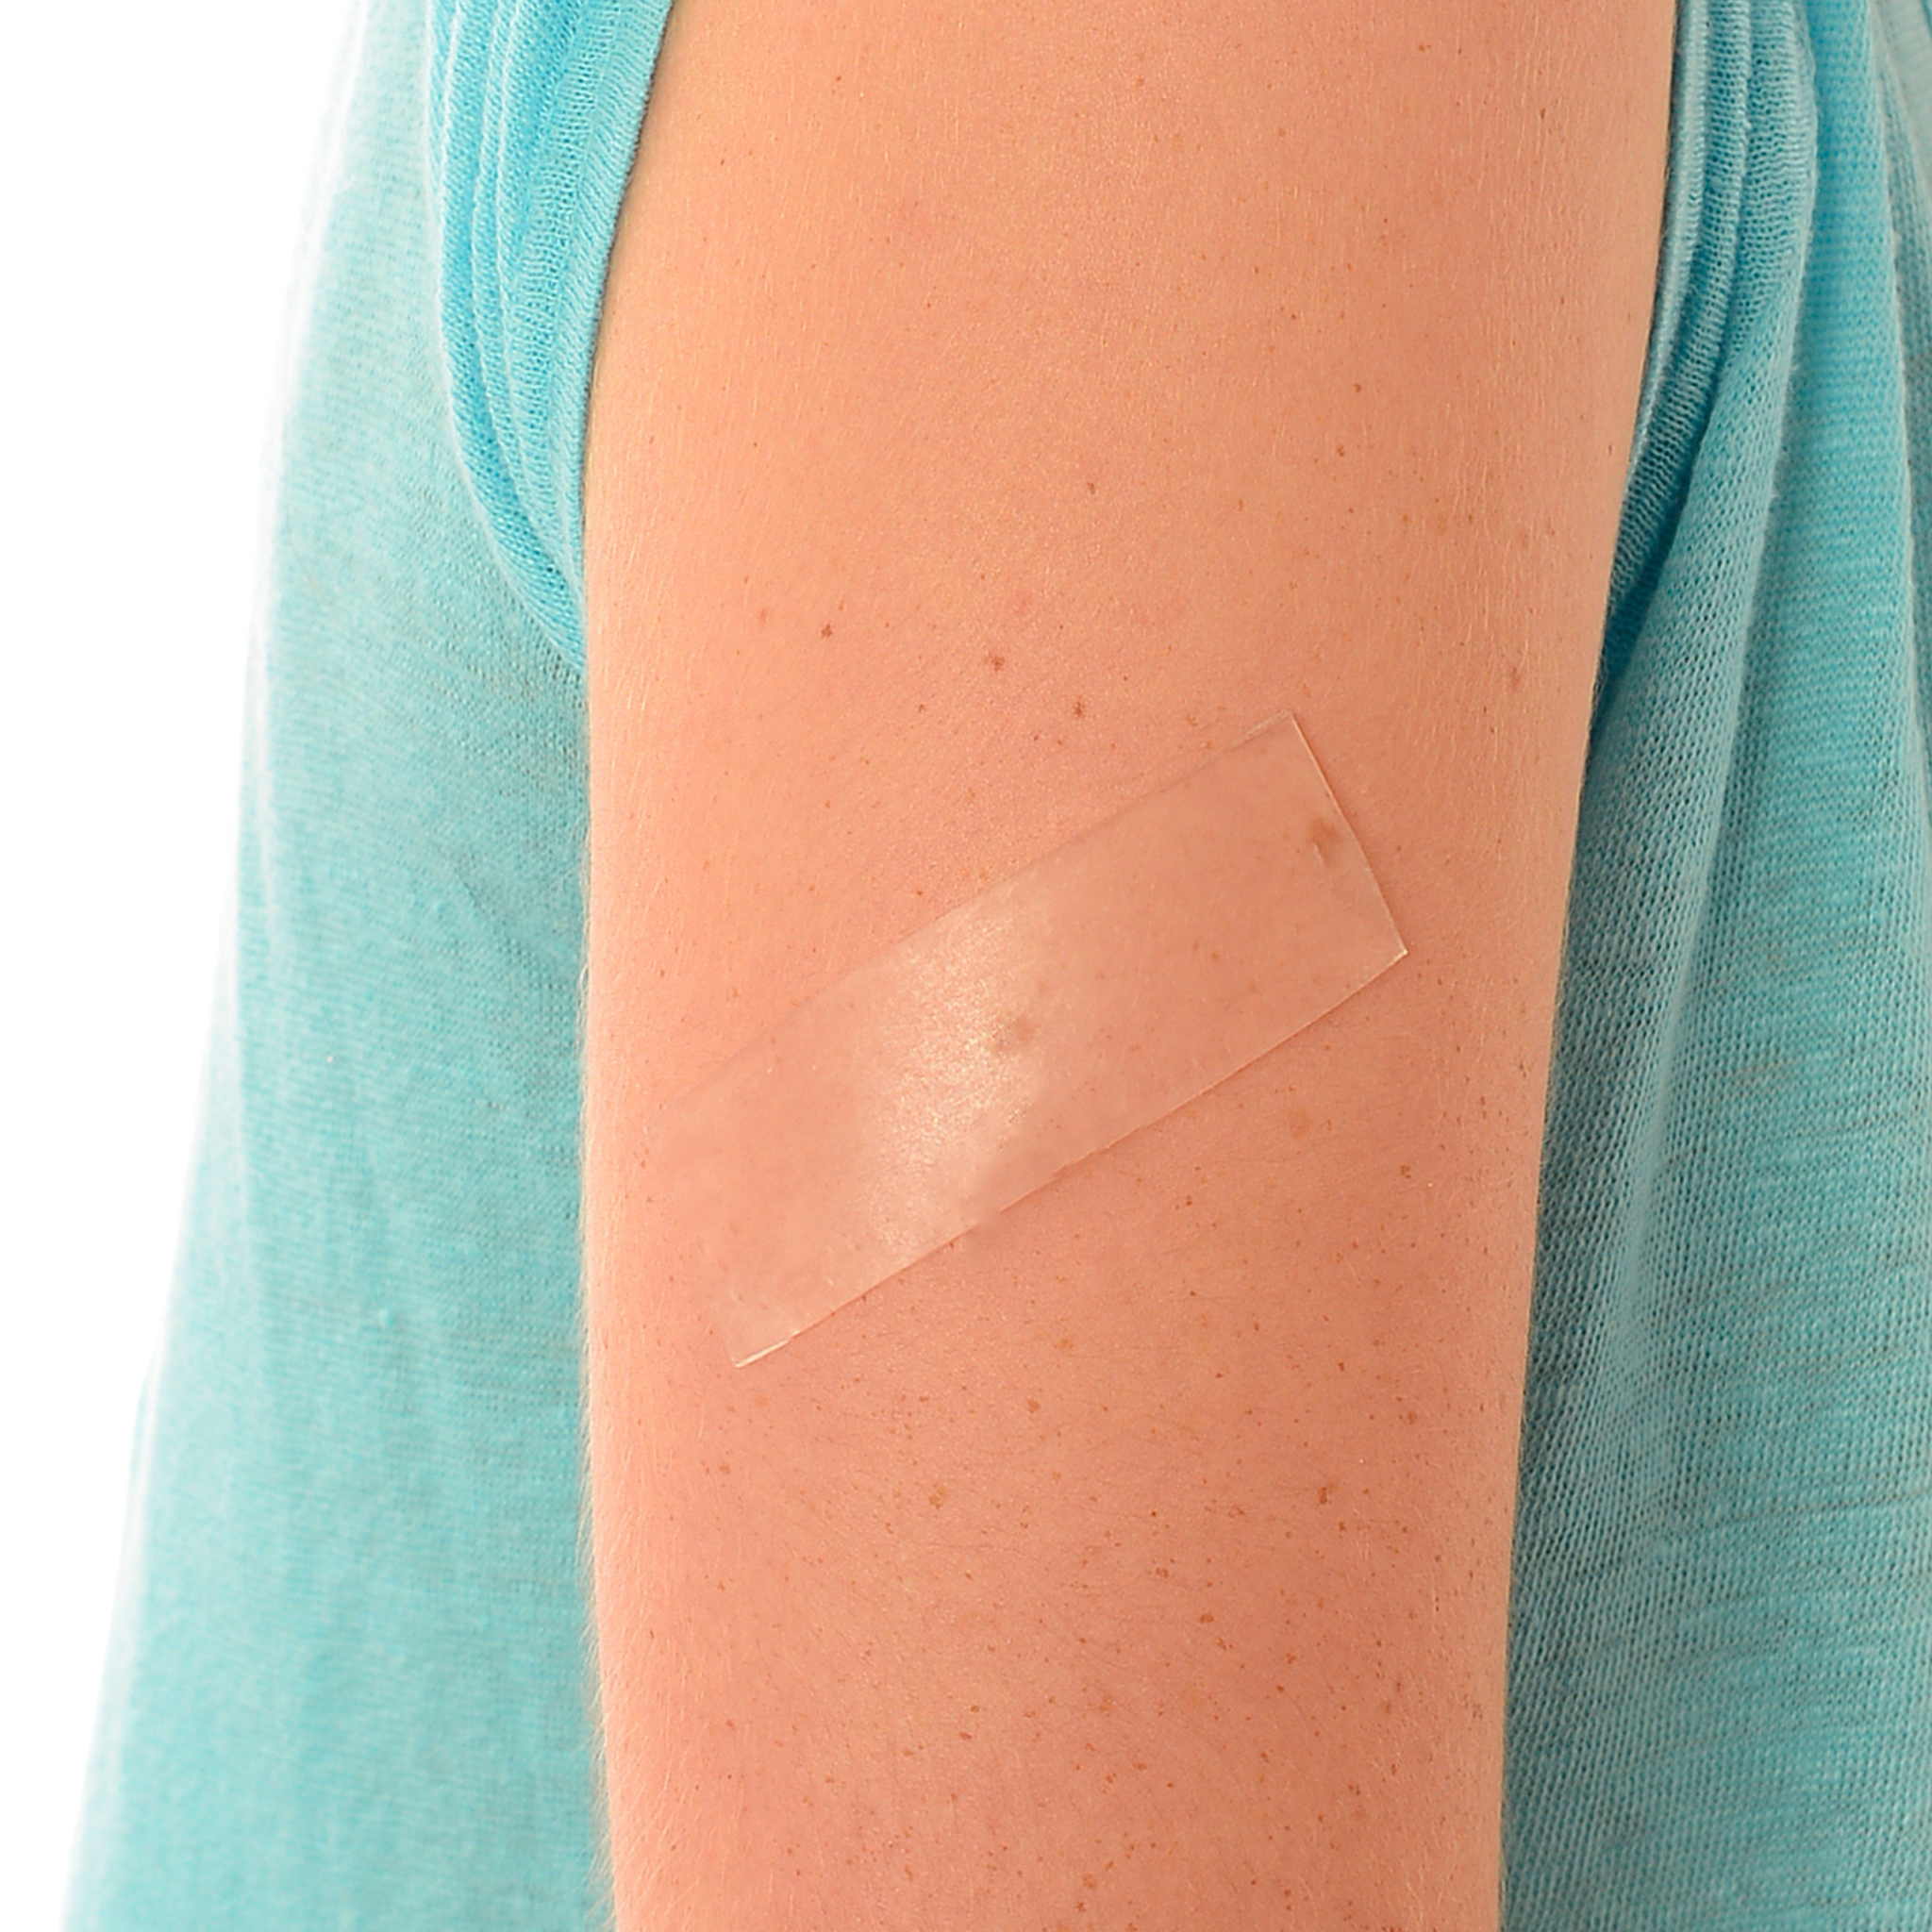 Advanced Medical-Grade Silicone 1" x 3" strips on caucasian women's arm | clear